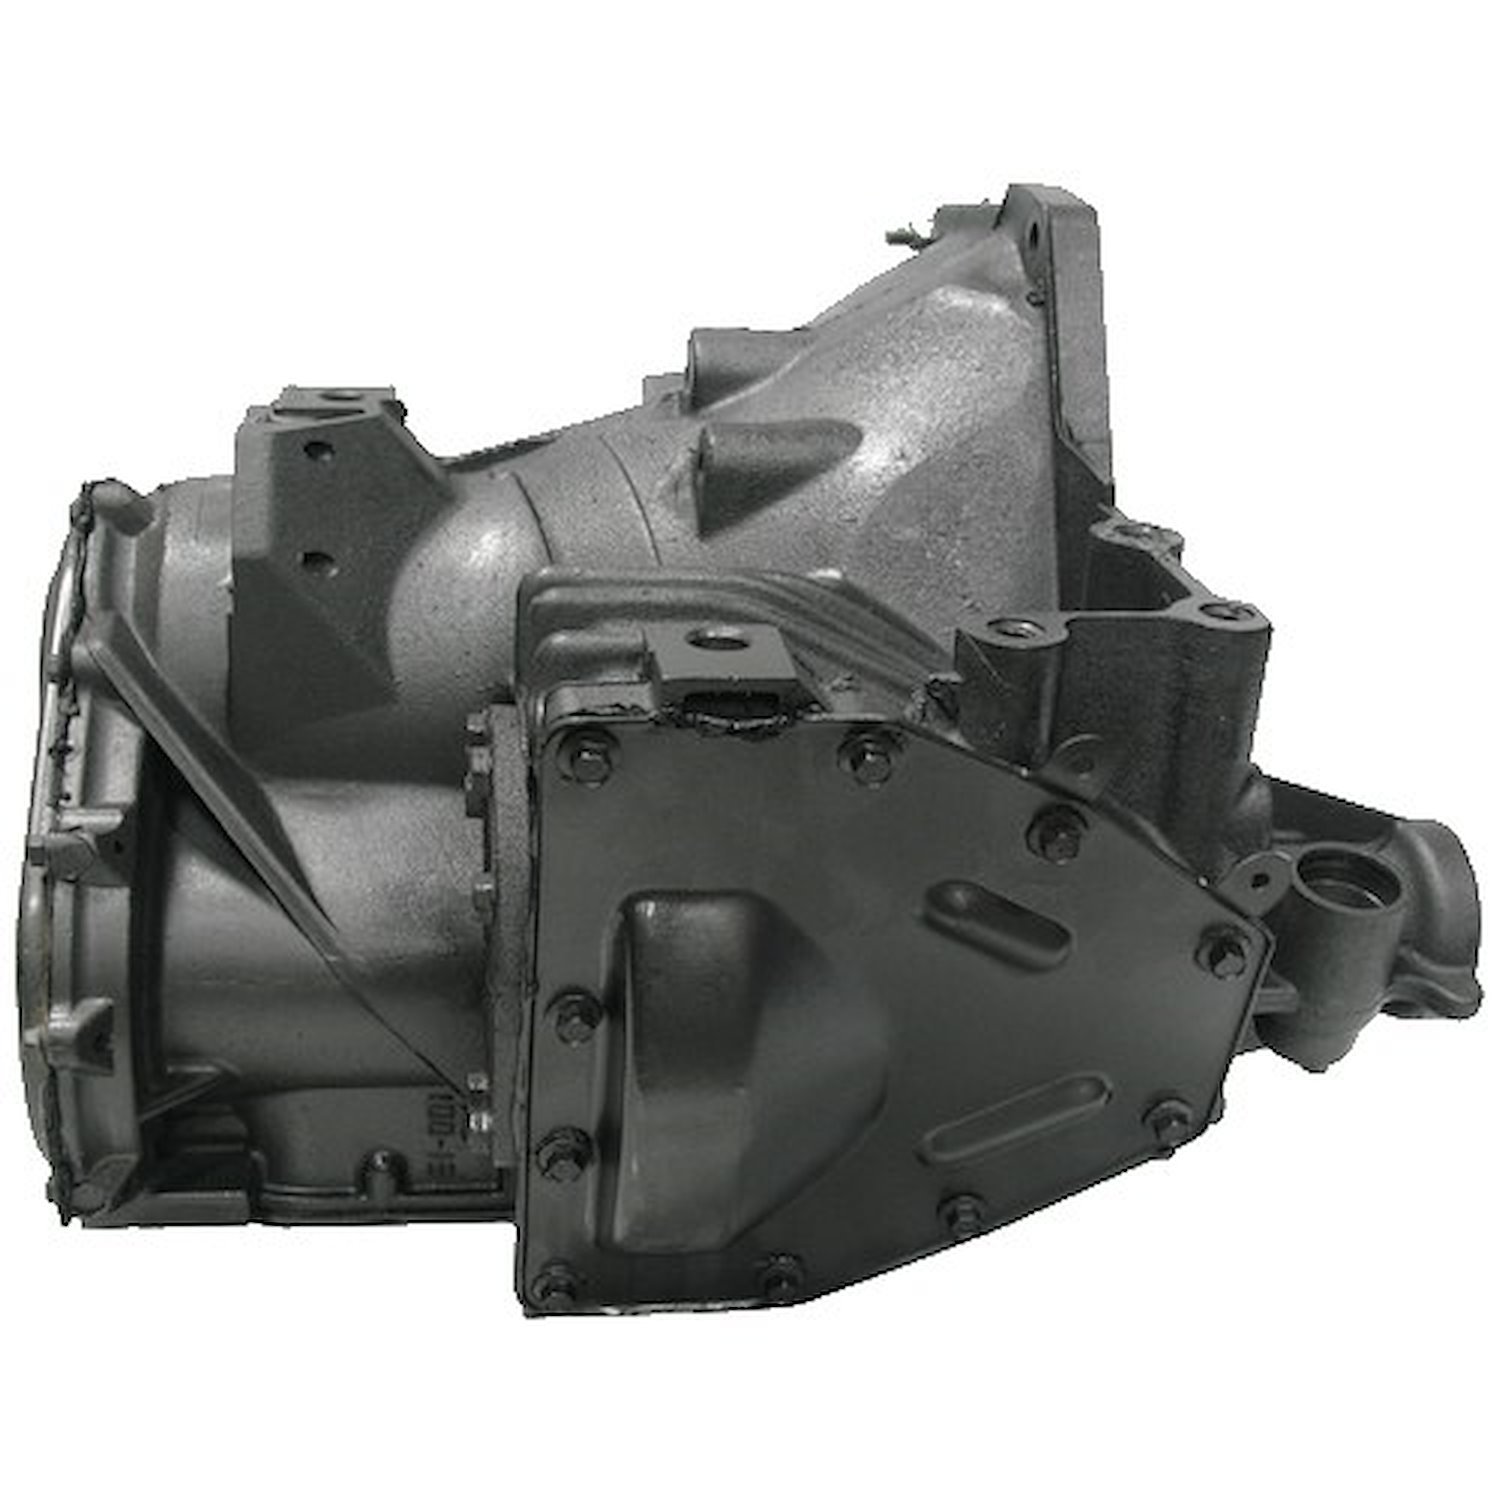 31TH Reman Auto Trans Fits 2000-2001 Dodge Neon, Plymouth Neon w/2.0L 4cyl. Eng.